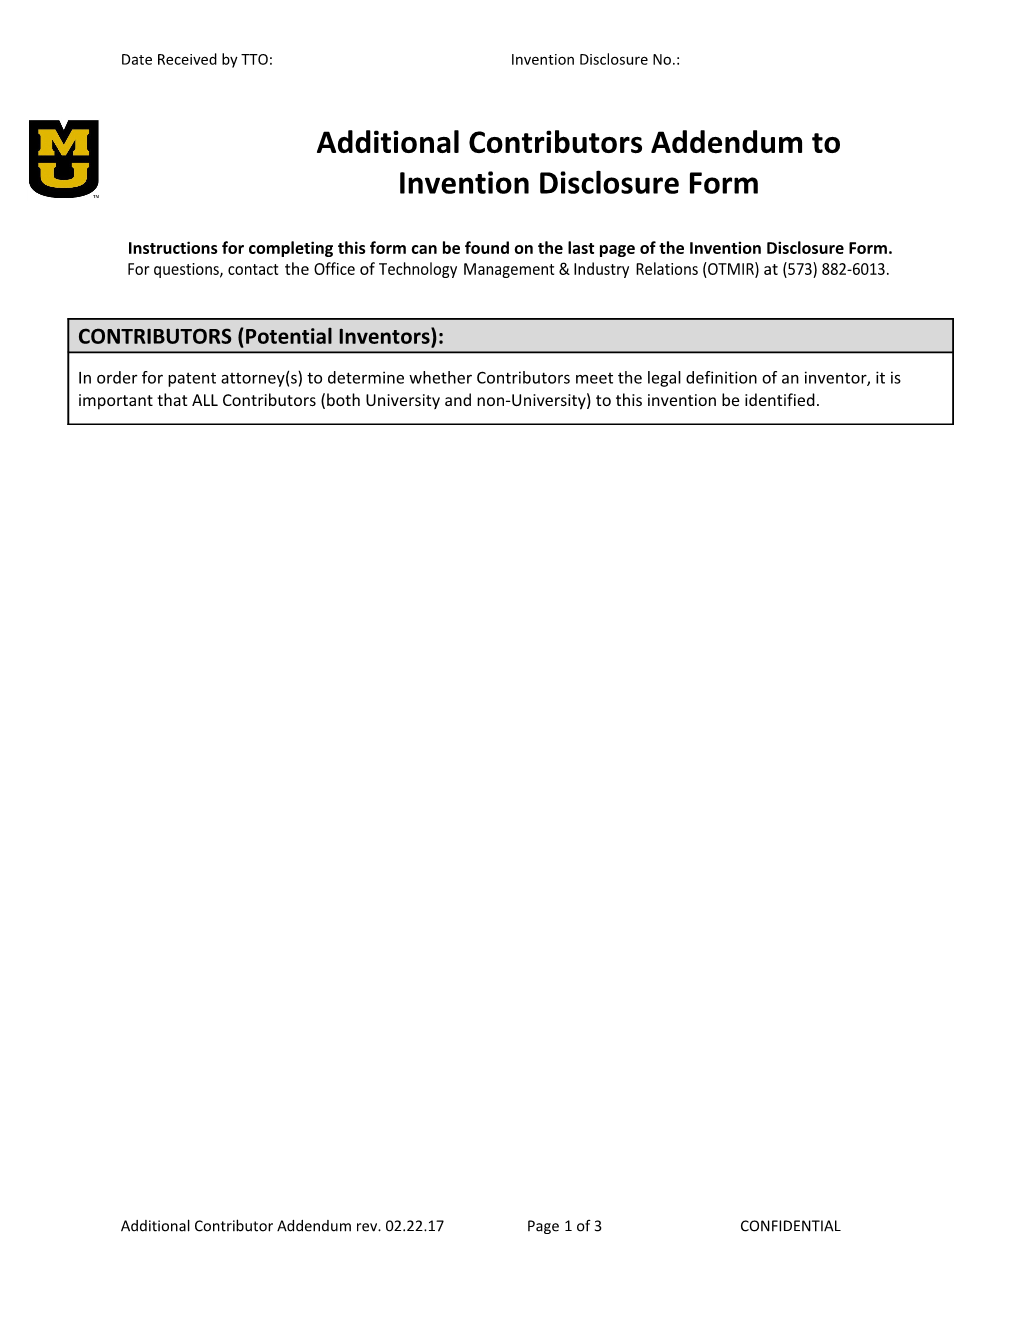 Instructions for Completing This Form Can Be Found on the Last Page of the Invention Disclosure